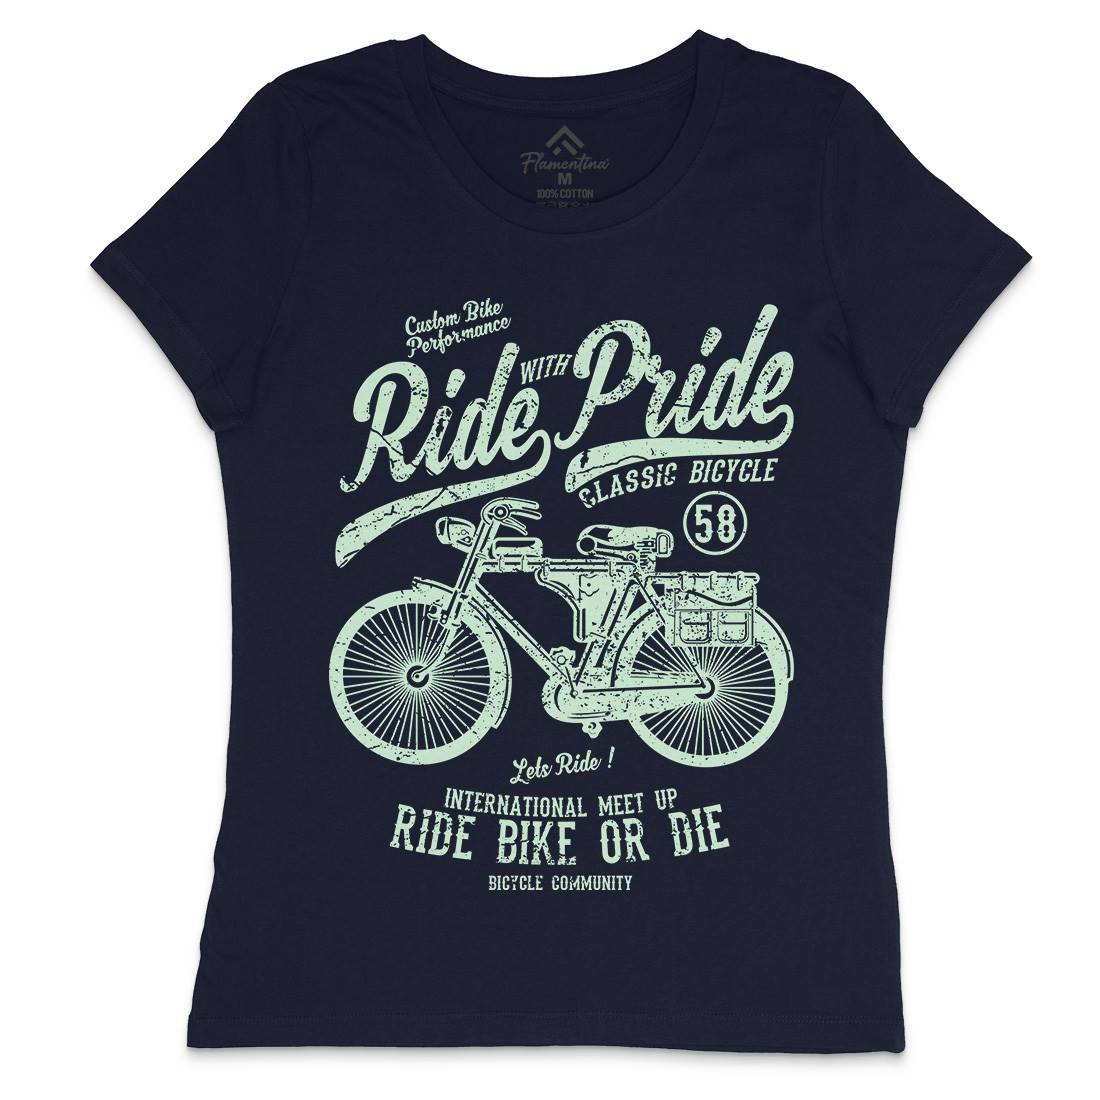 Ride With Pride Womens Crew Neck T-Shirt Bikes A121